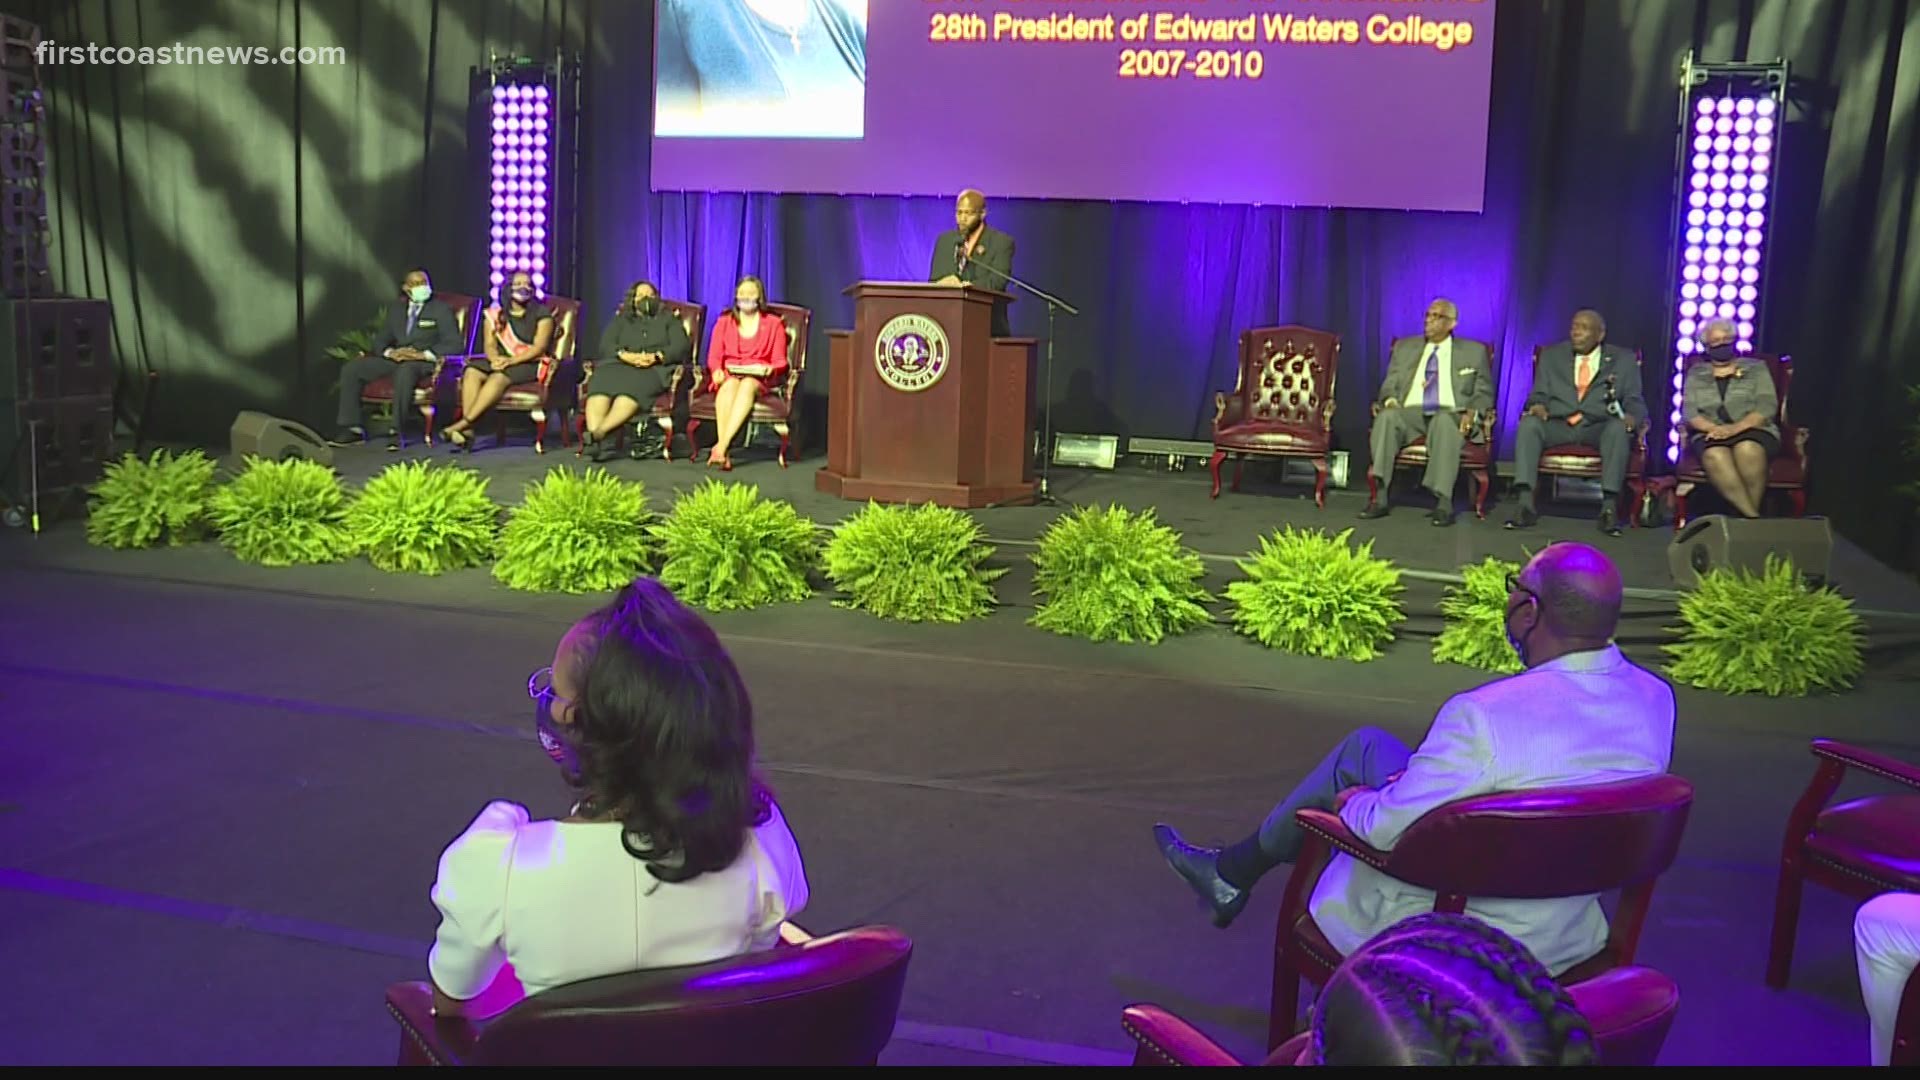 It's official! Edward Waters College is now Edward Waters University